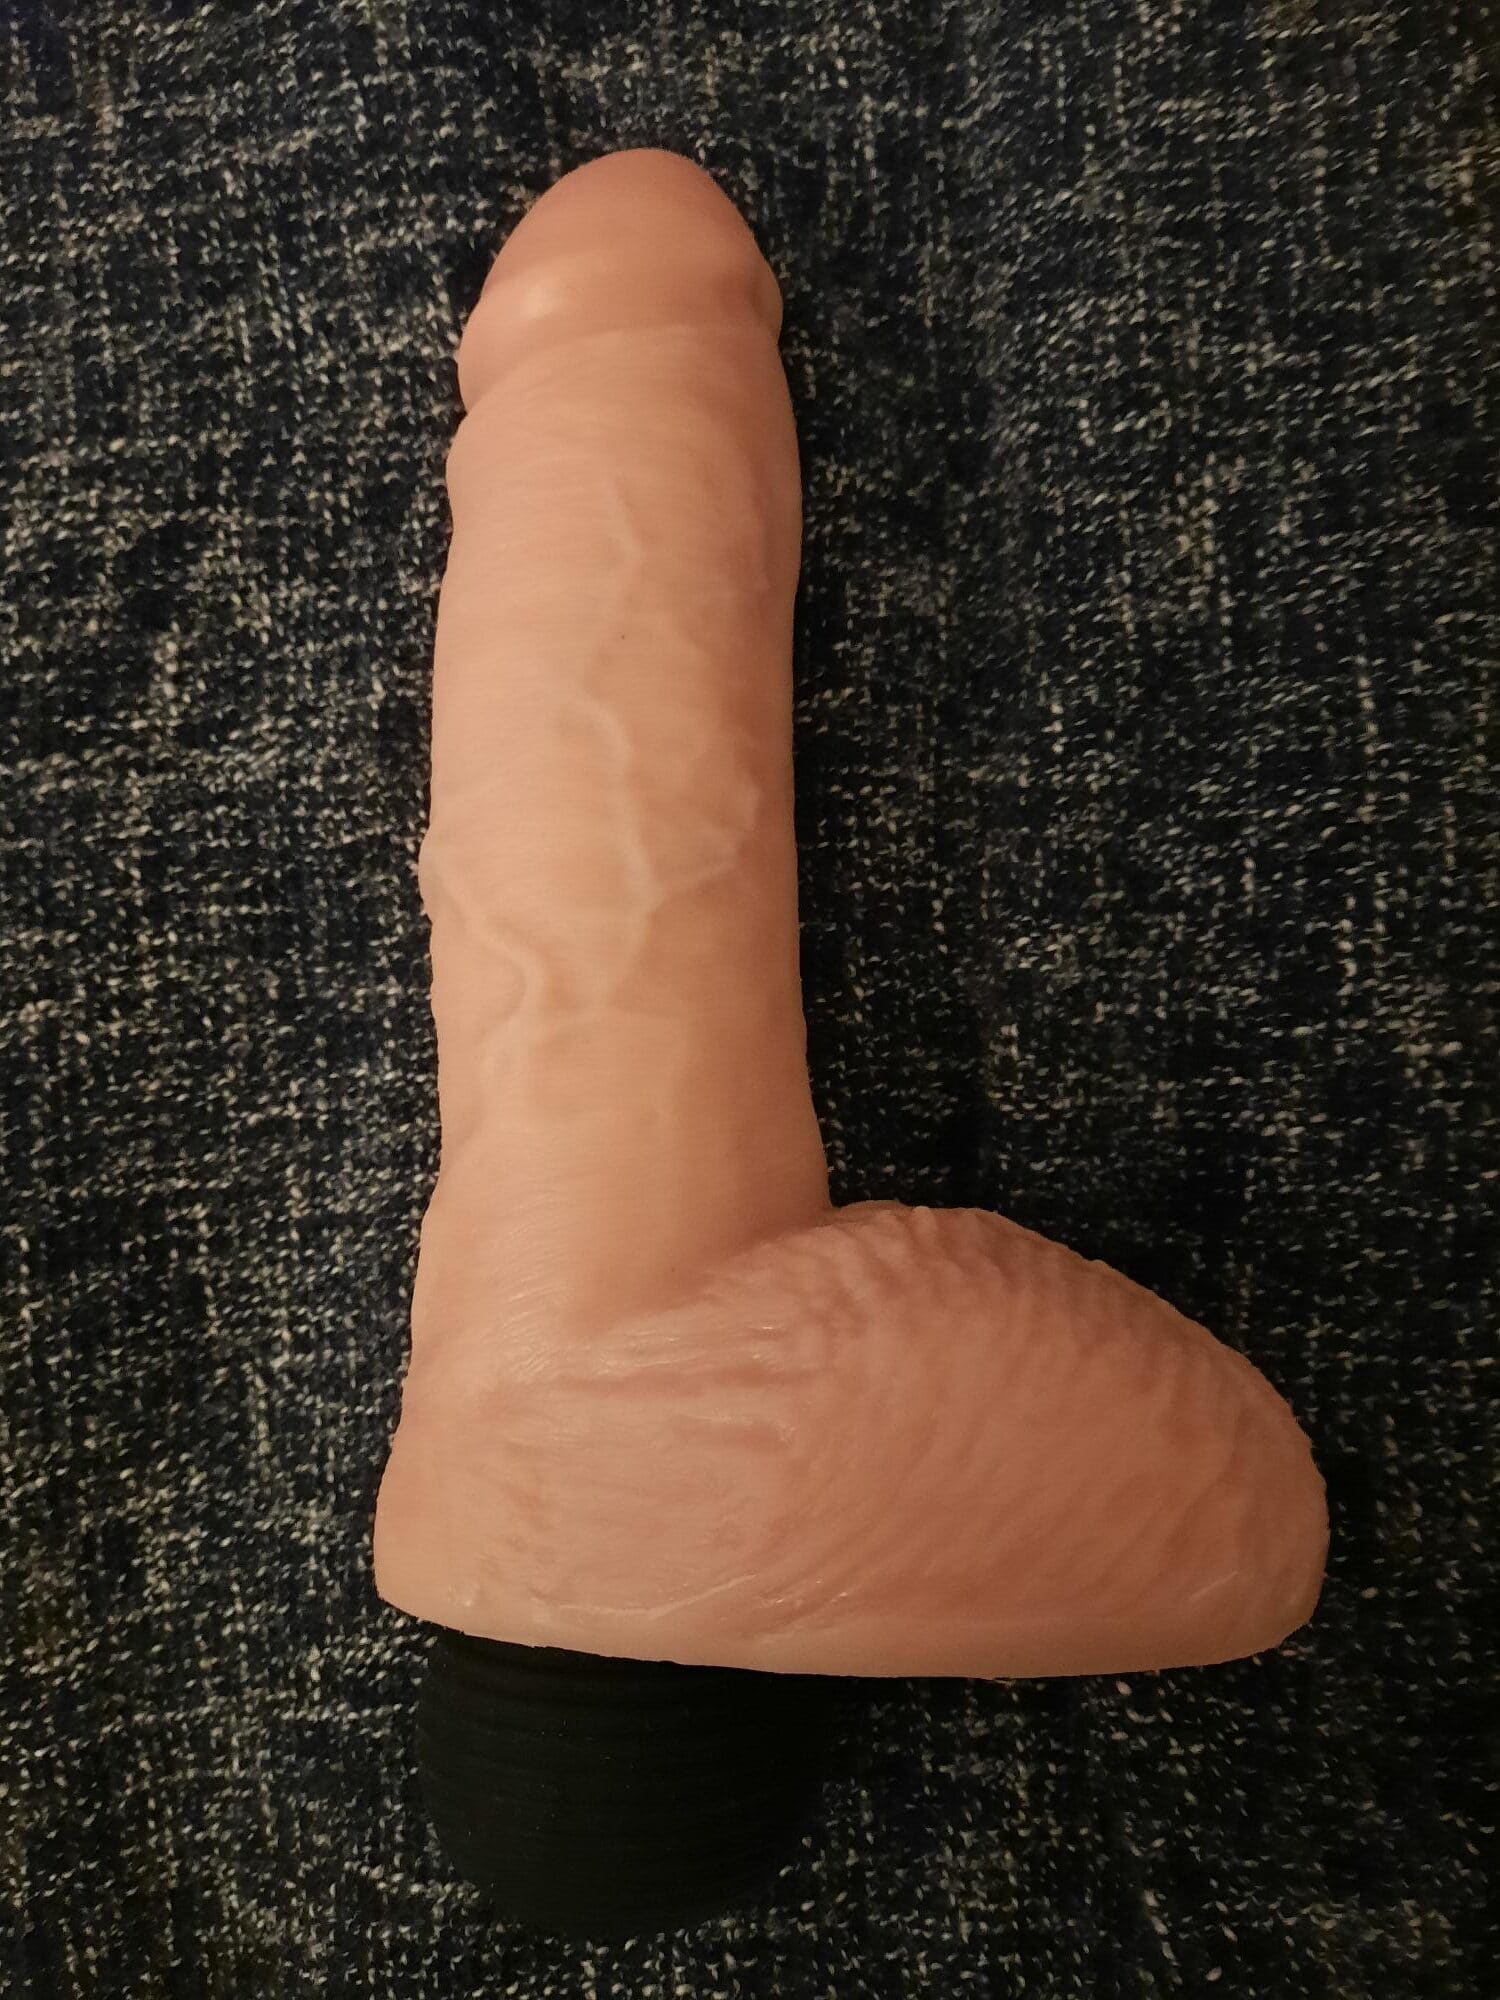 King Cock 8 Inch Squirting Cock with Balls. Slide 3